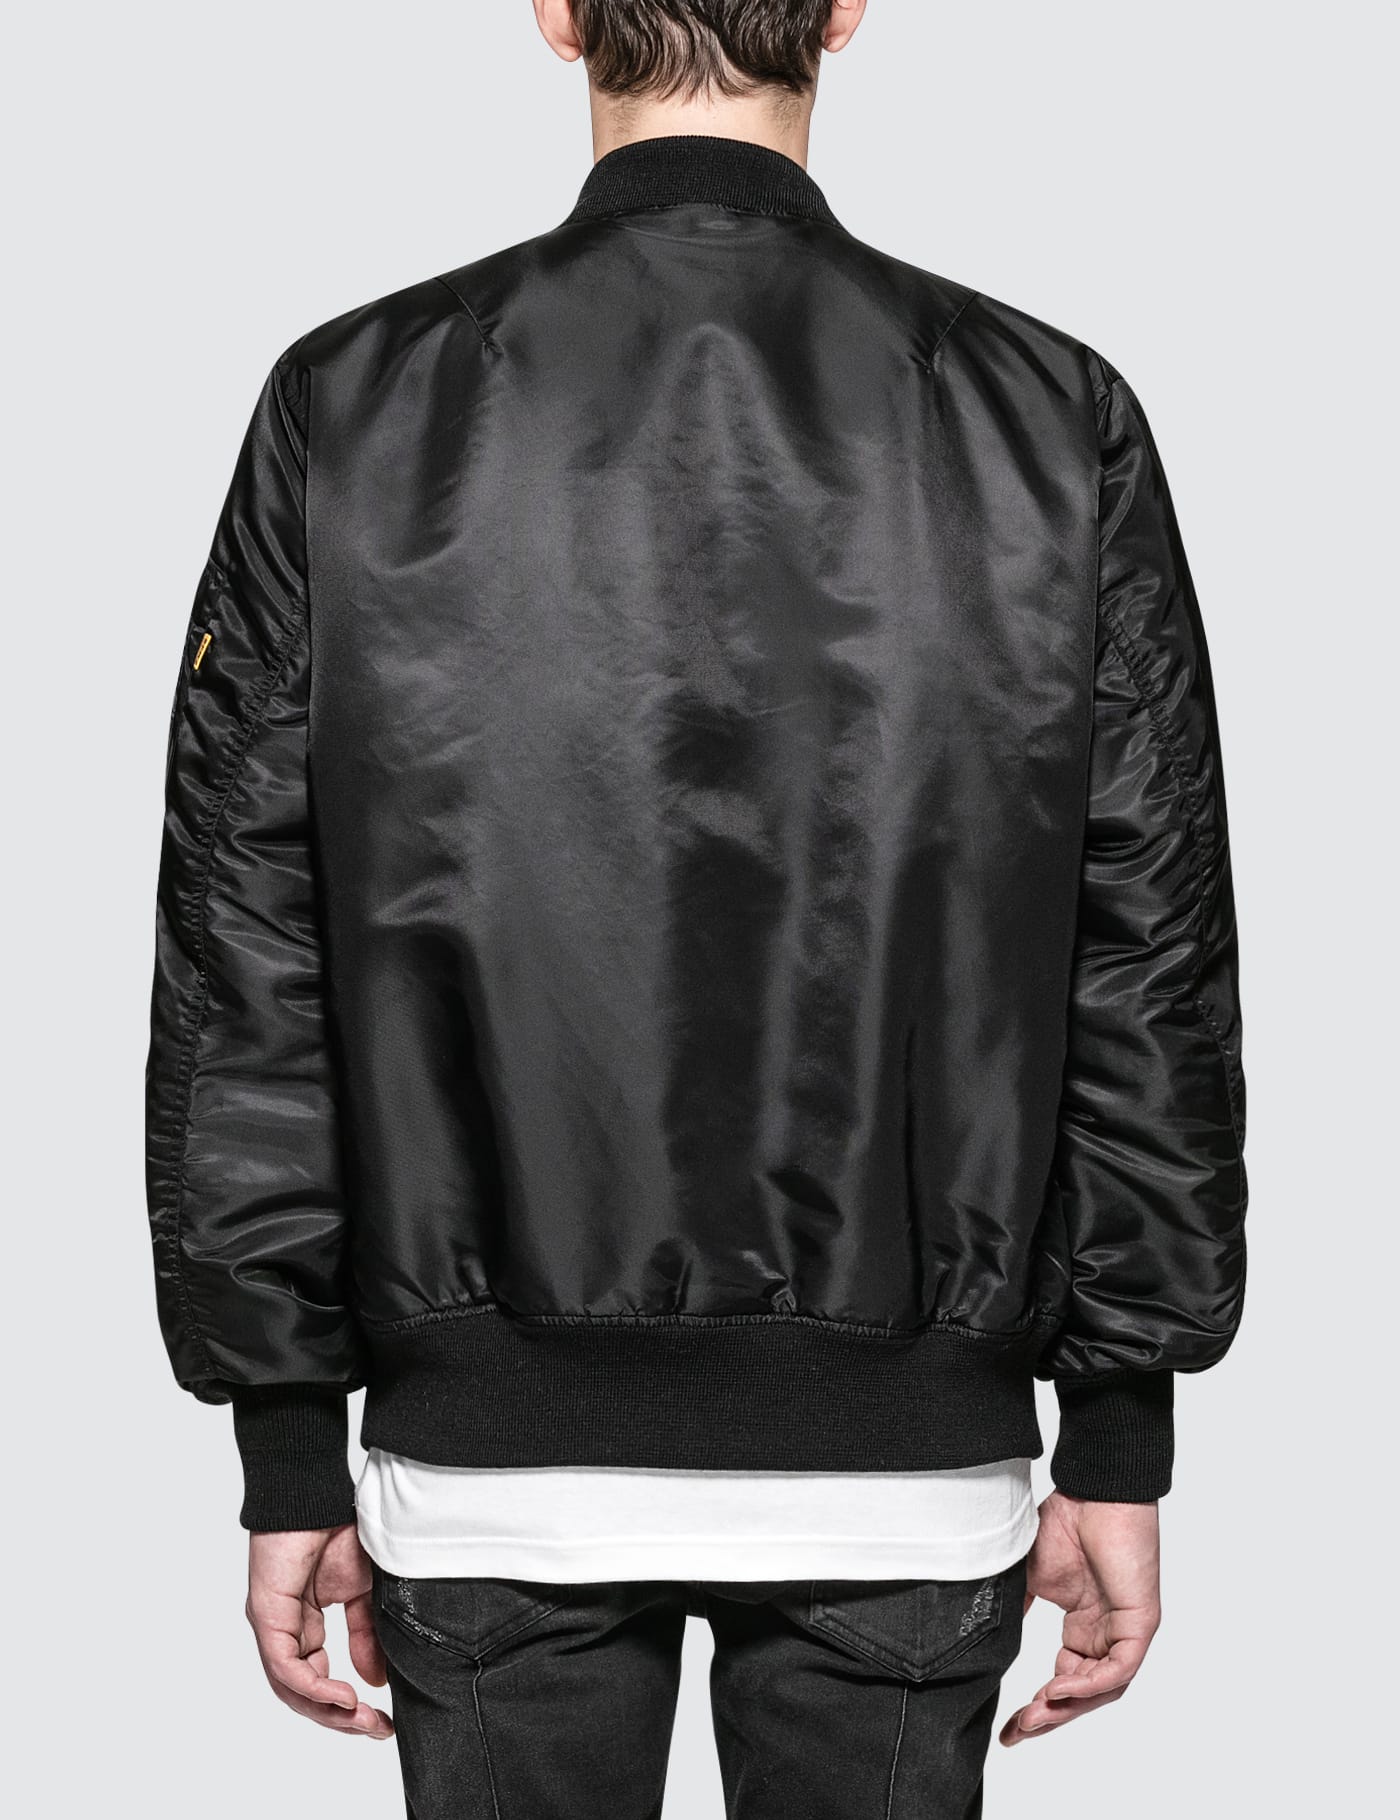 FR2 - MA-1 Jacket | HBX - Globally Curated Fashion and Lifestyle 